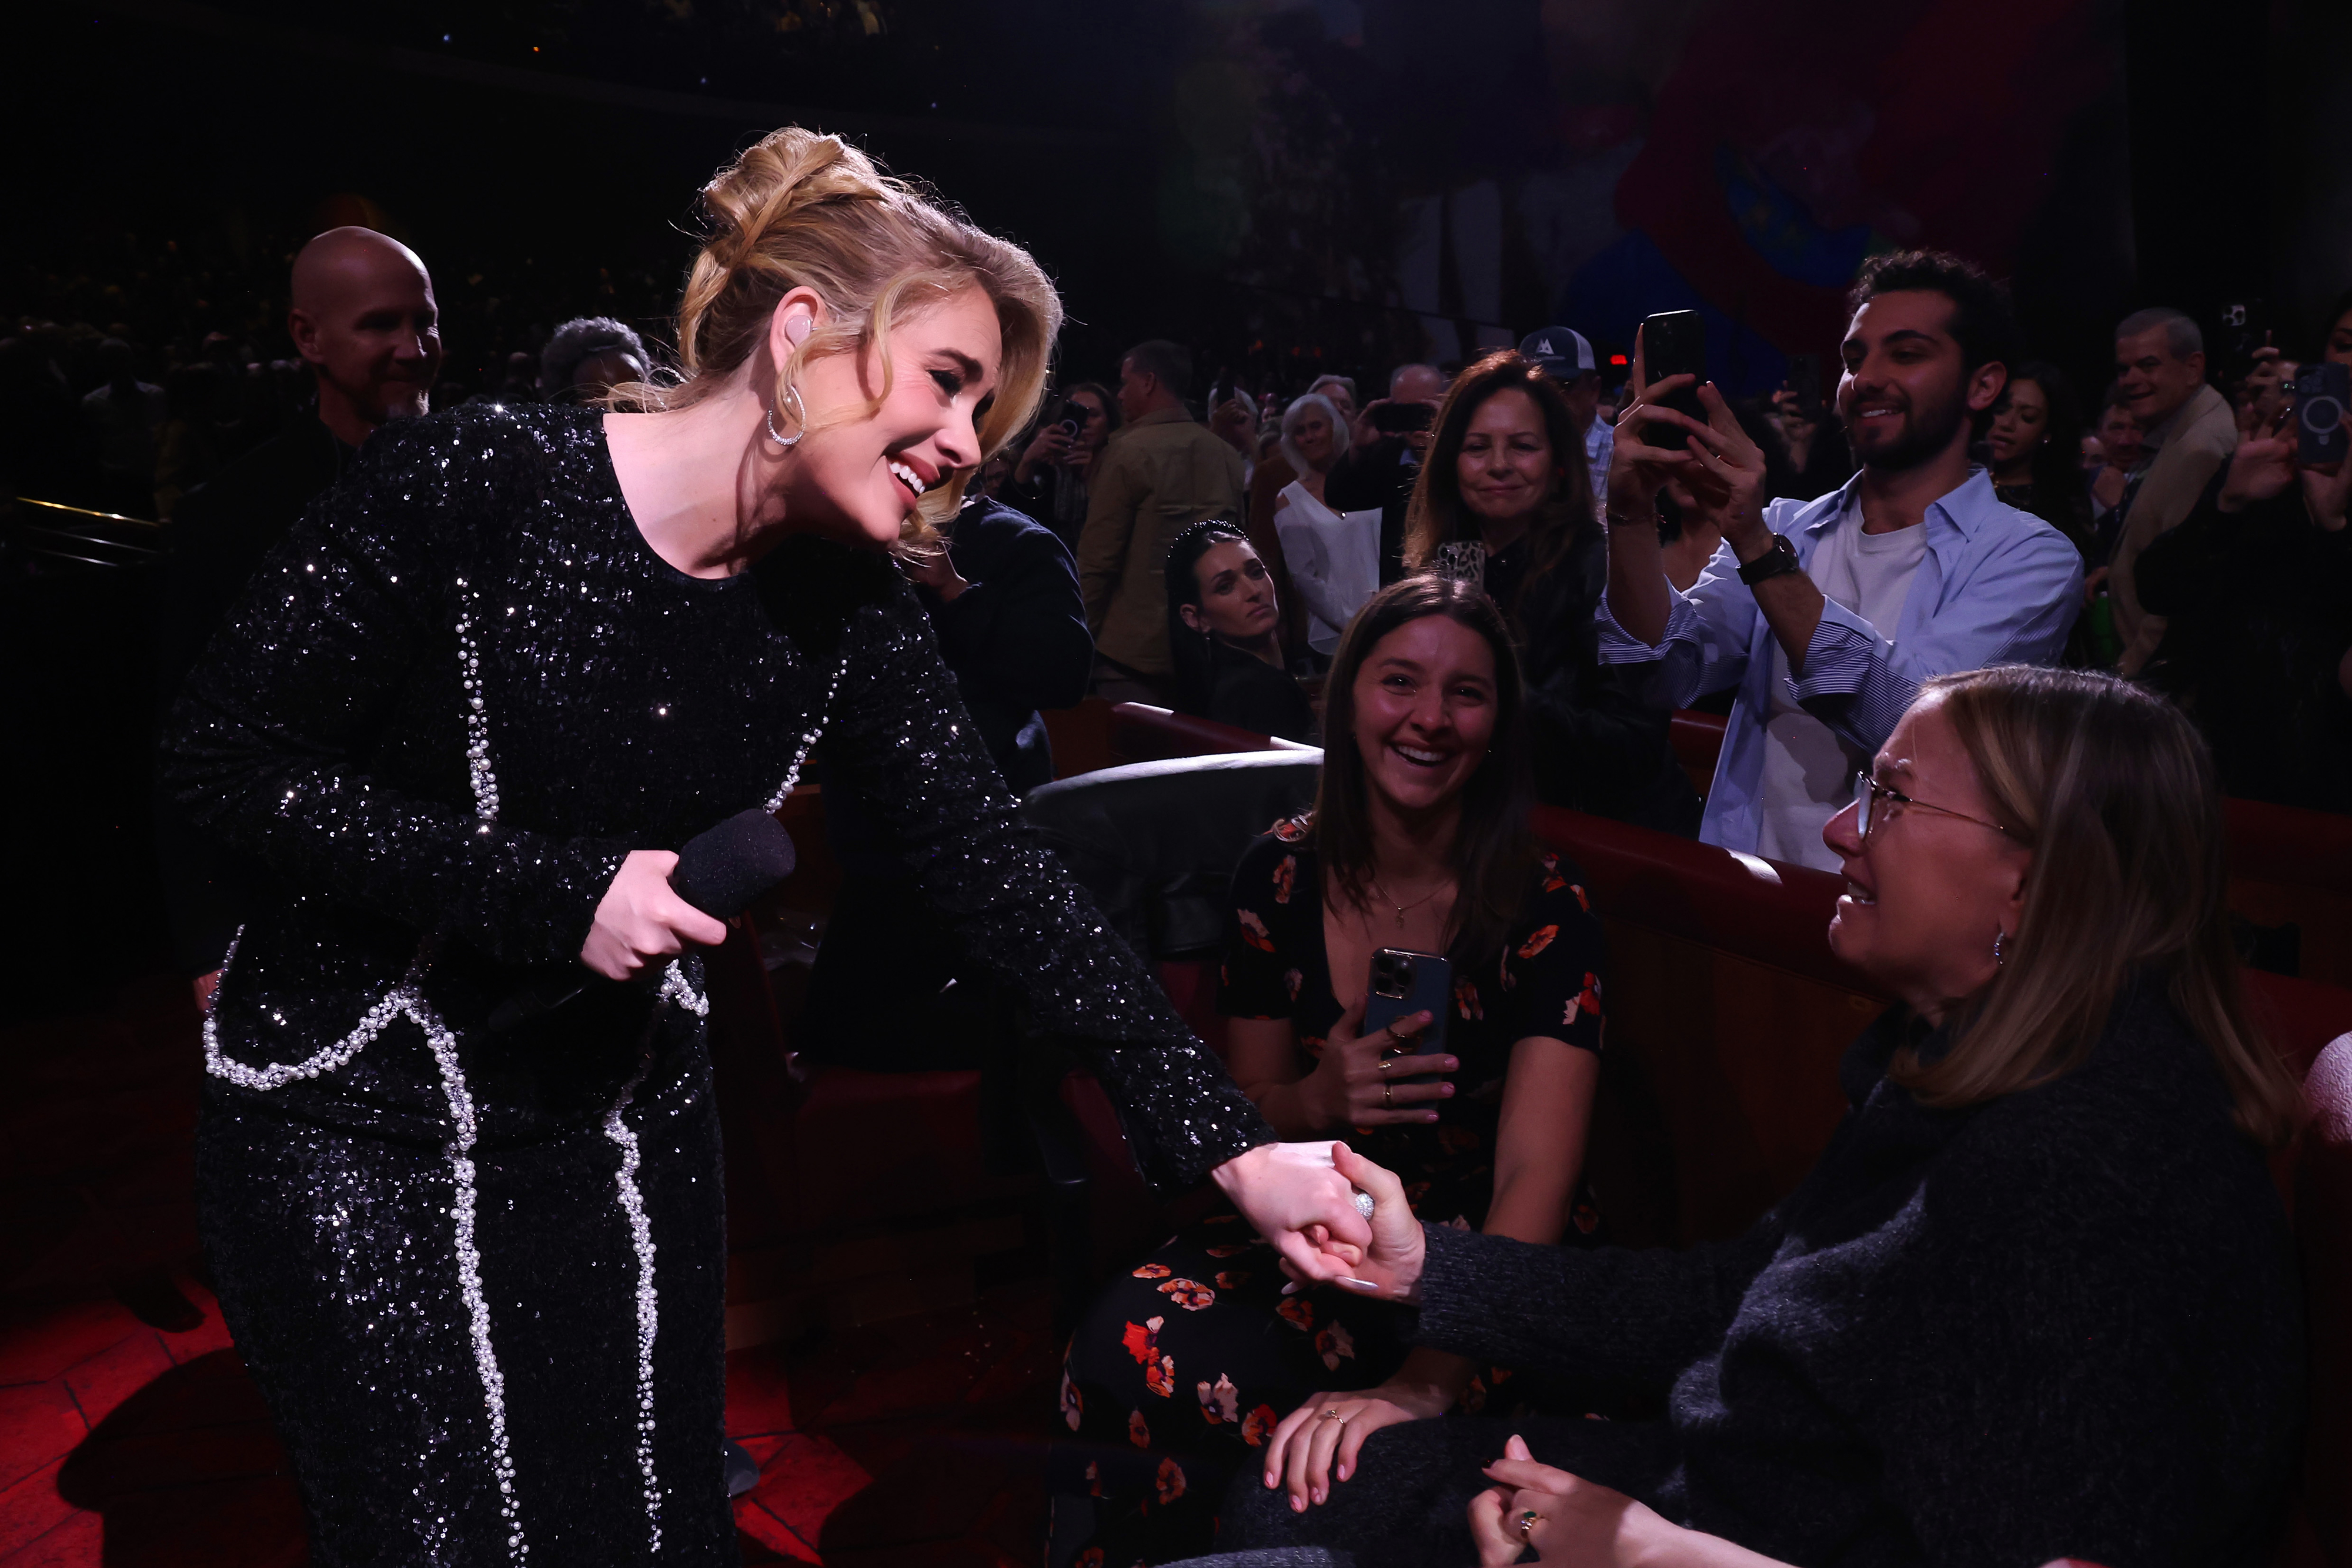 Adele shaking hands with a fan, wearing a sparkling outfit, at an indoor event surrounded by an audience